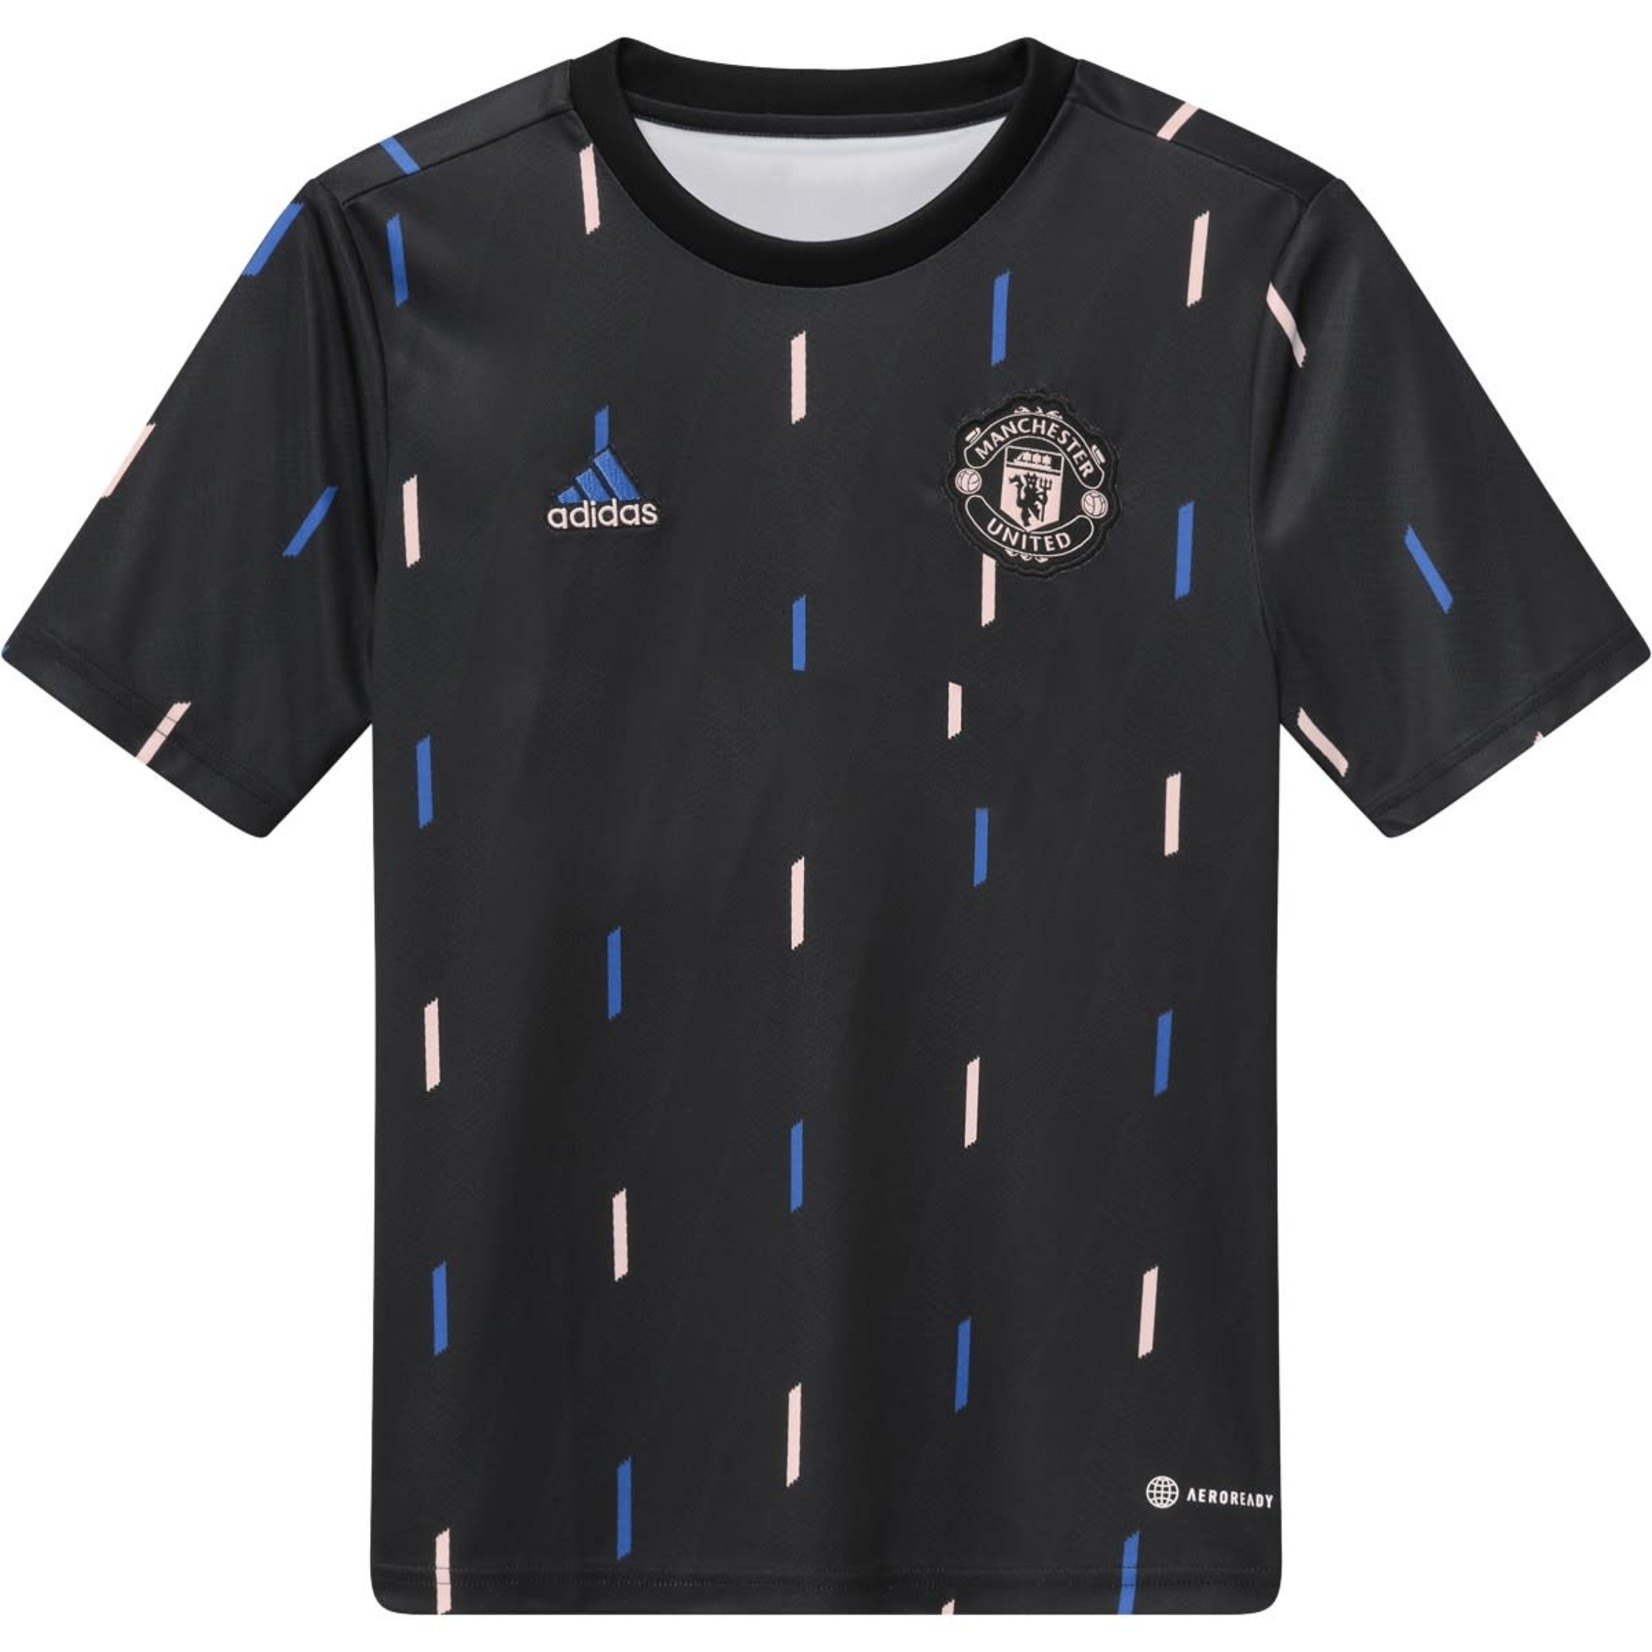 ADIDAS MANCHESTER UNITED 22/23 PREMATCH JERSEY YOUTH (BLACK/PINK)